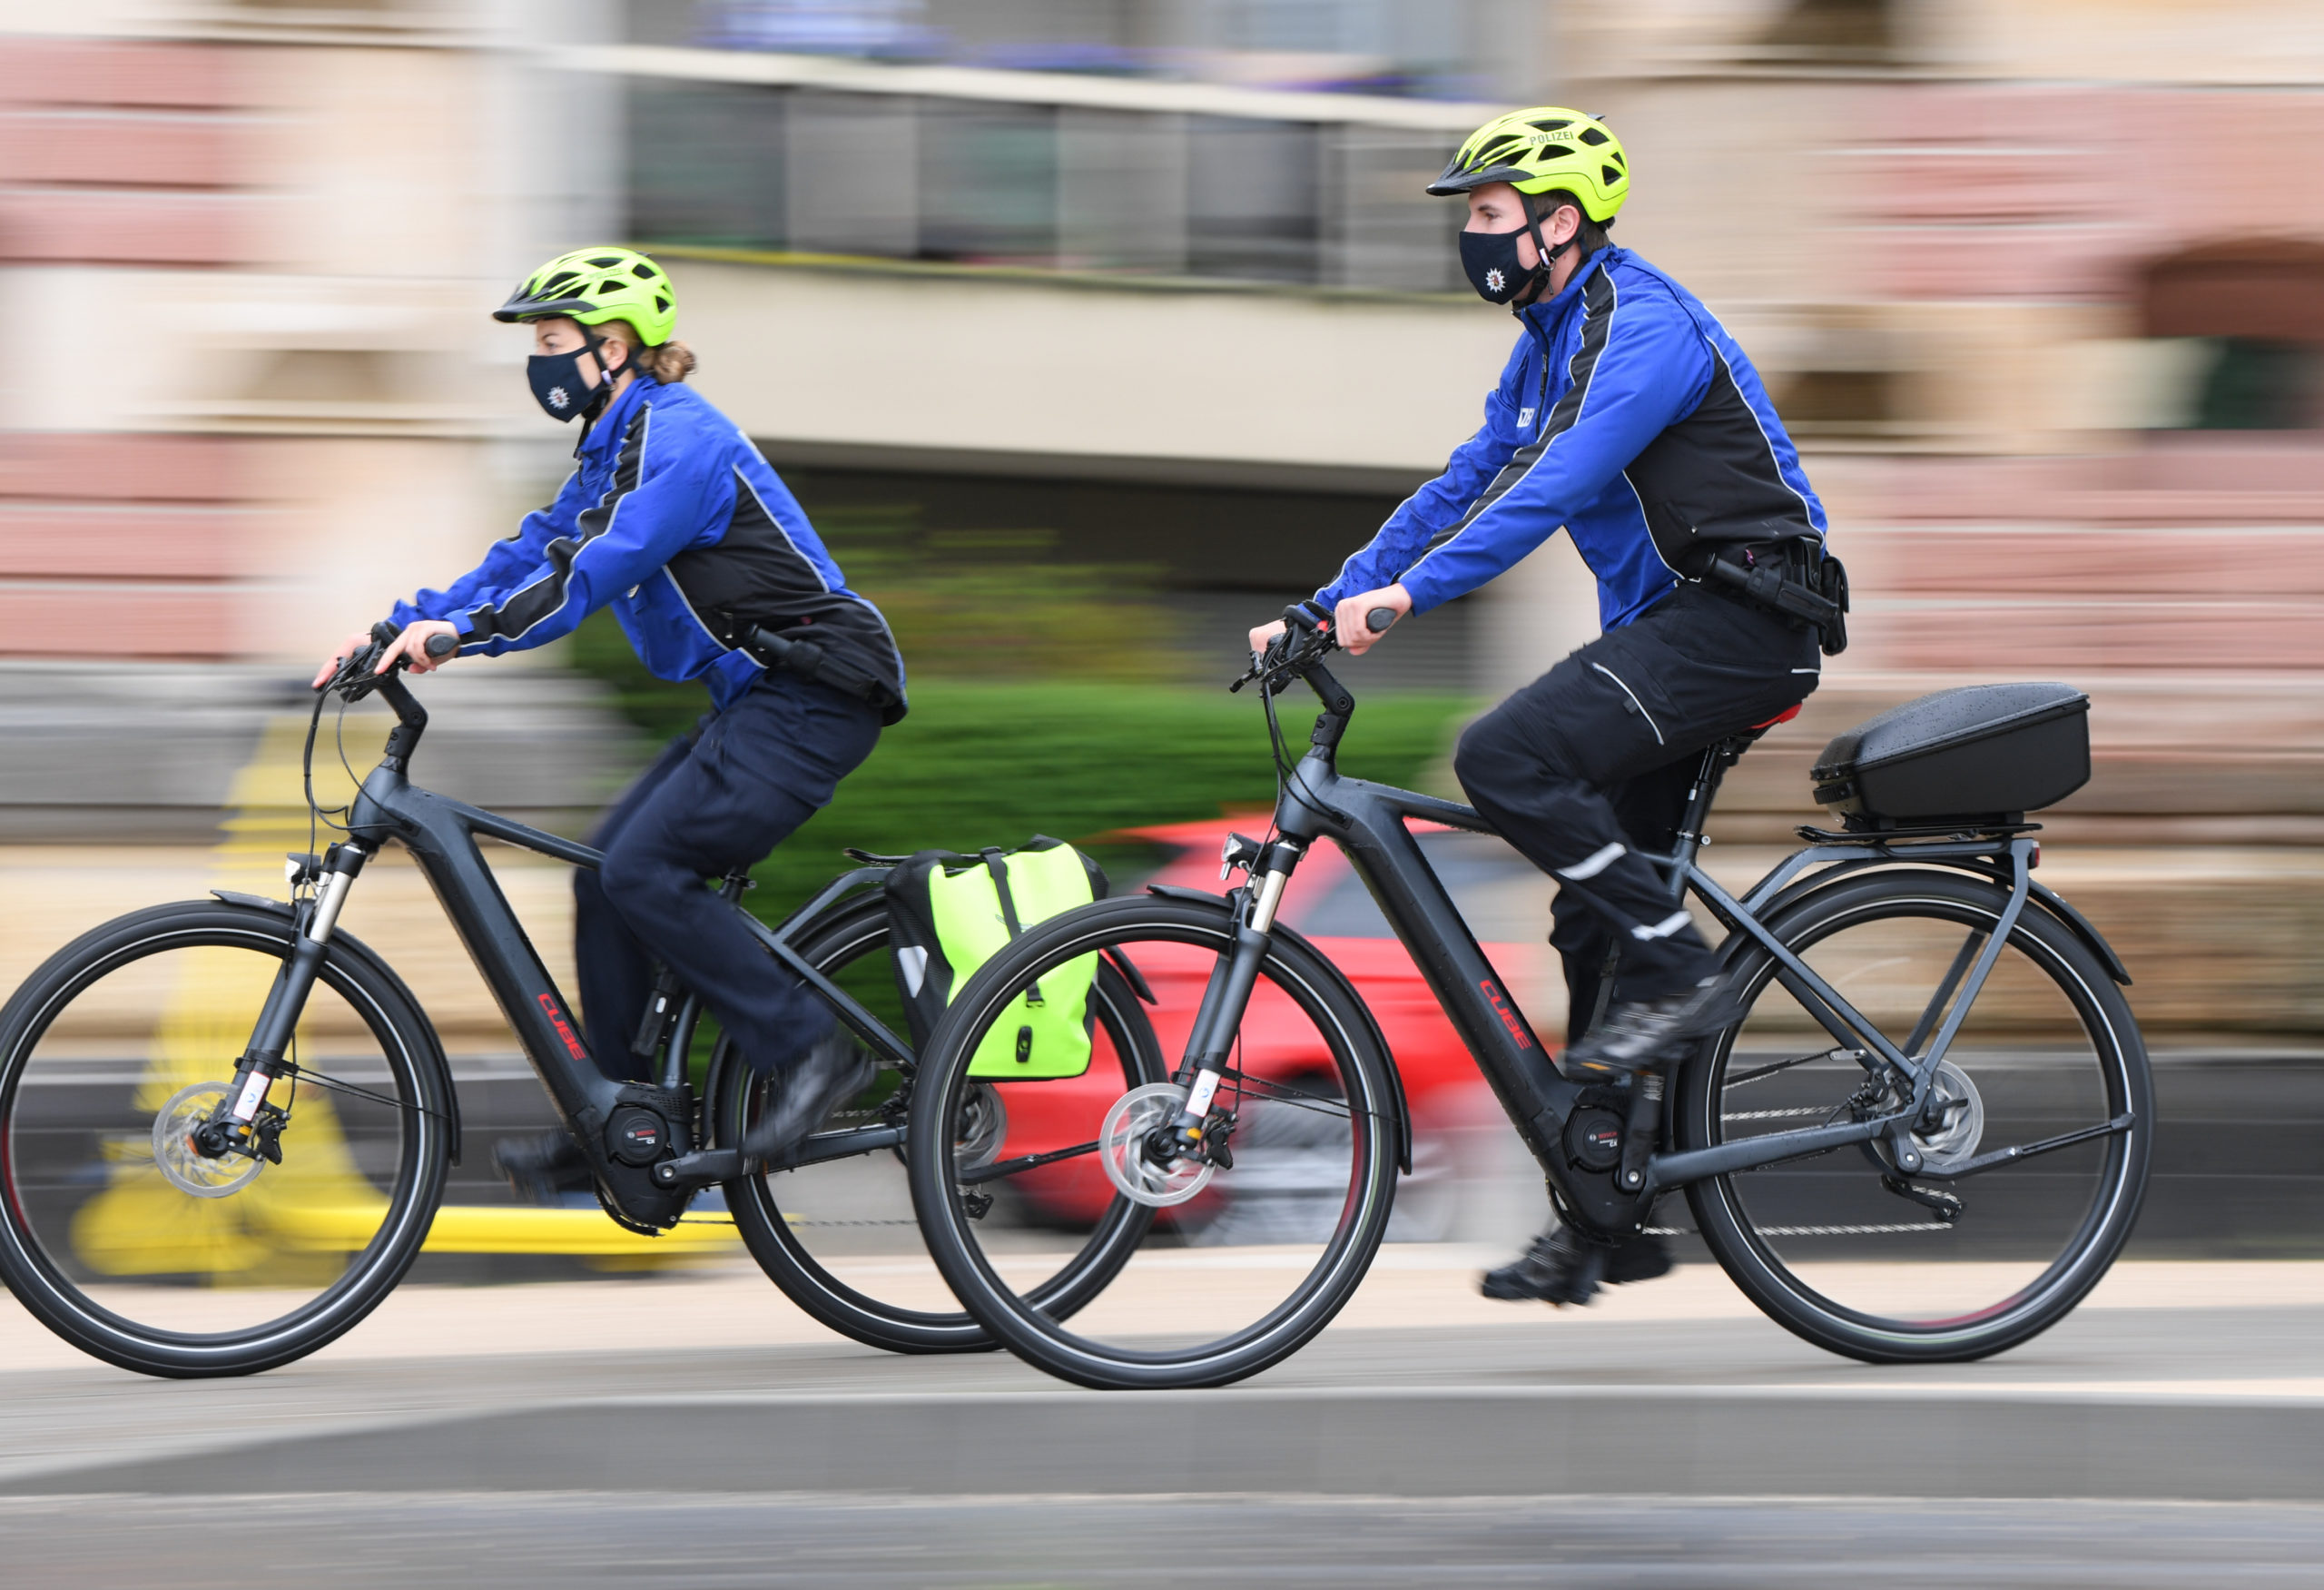 Vias: ‘Number of e-bike users doubled in five years’